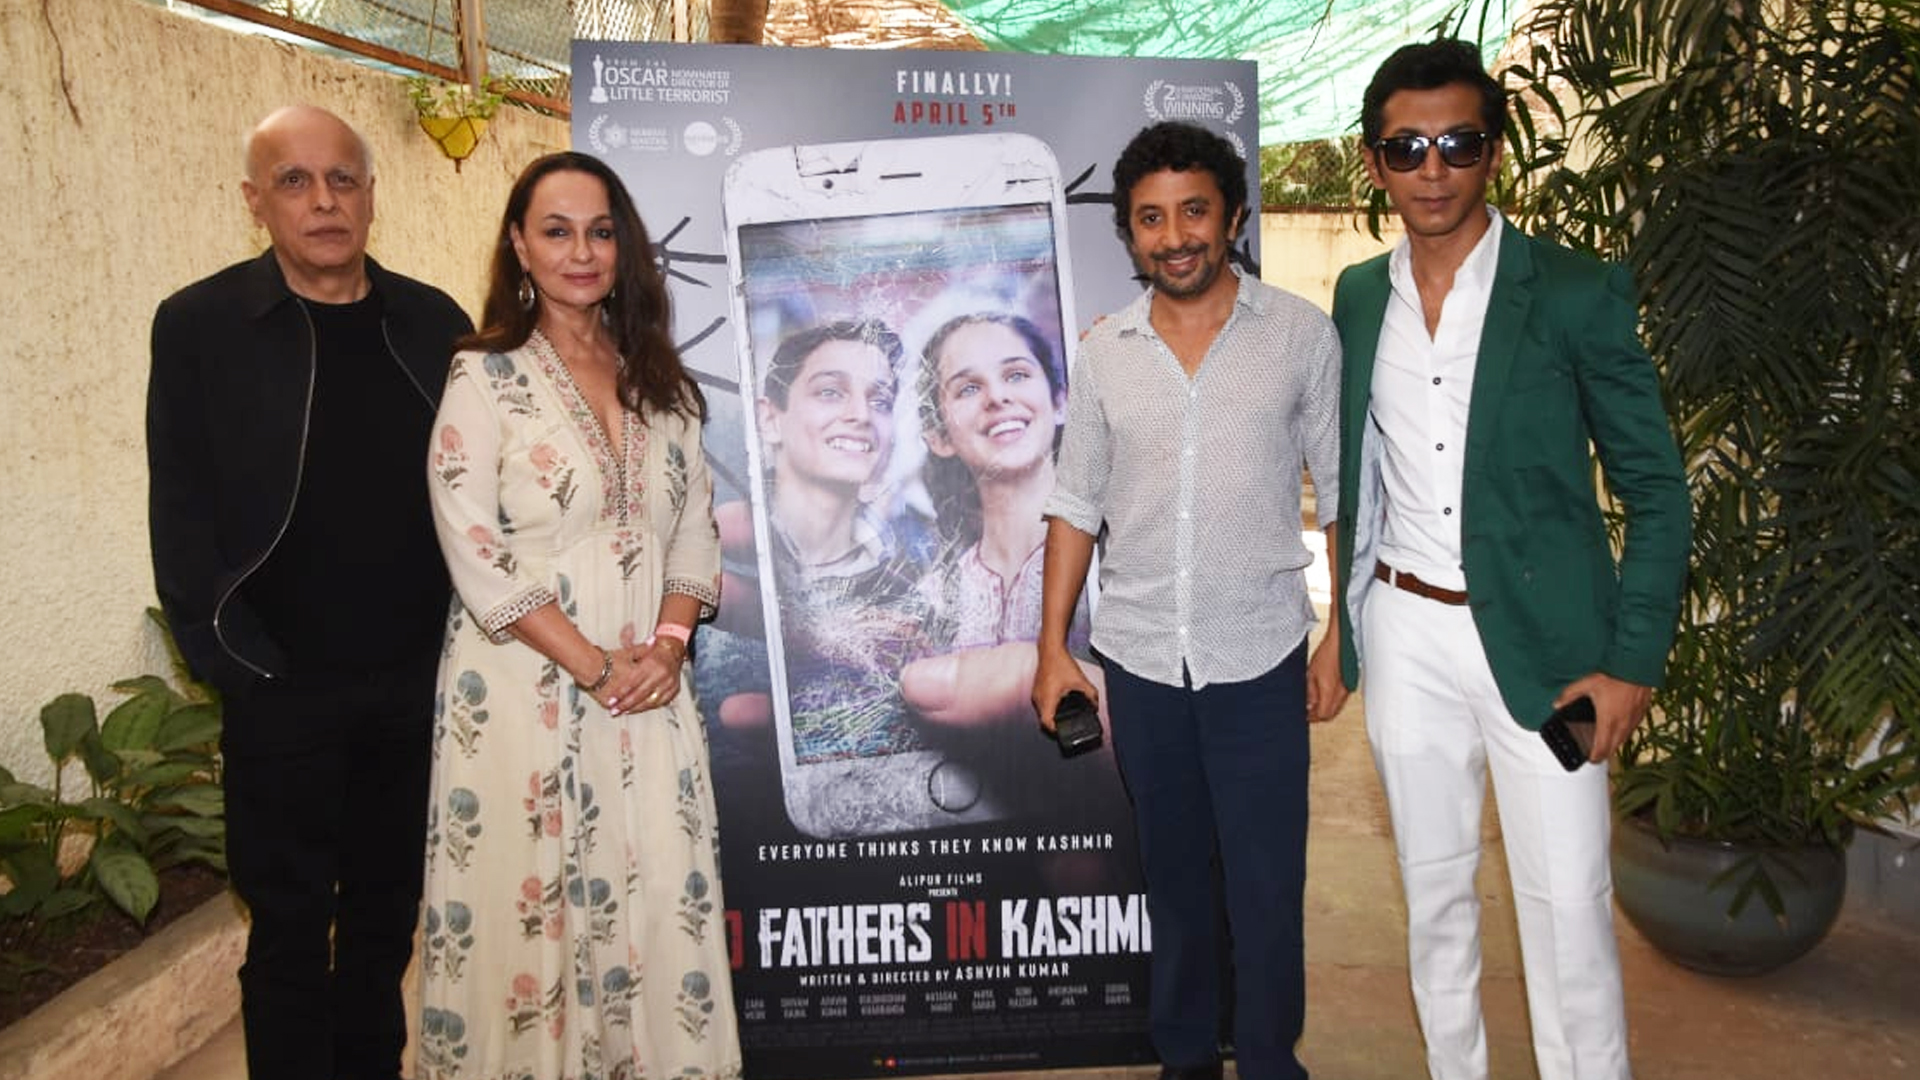 No Fathers in Kashmir trailer launched by Mahesh Bhatt, trailer raises imperative questions of the realities of people in the valley!